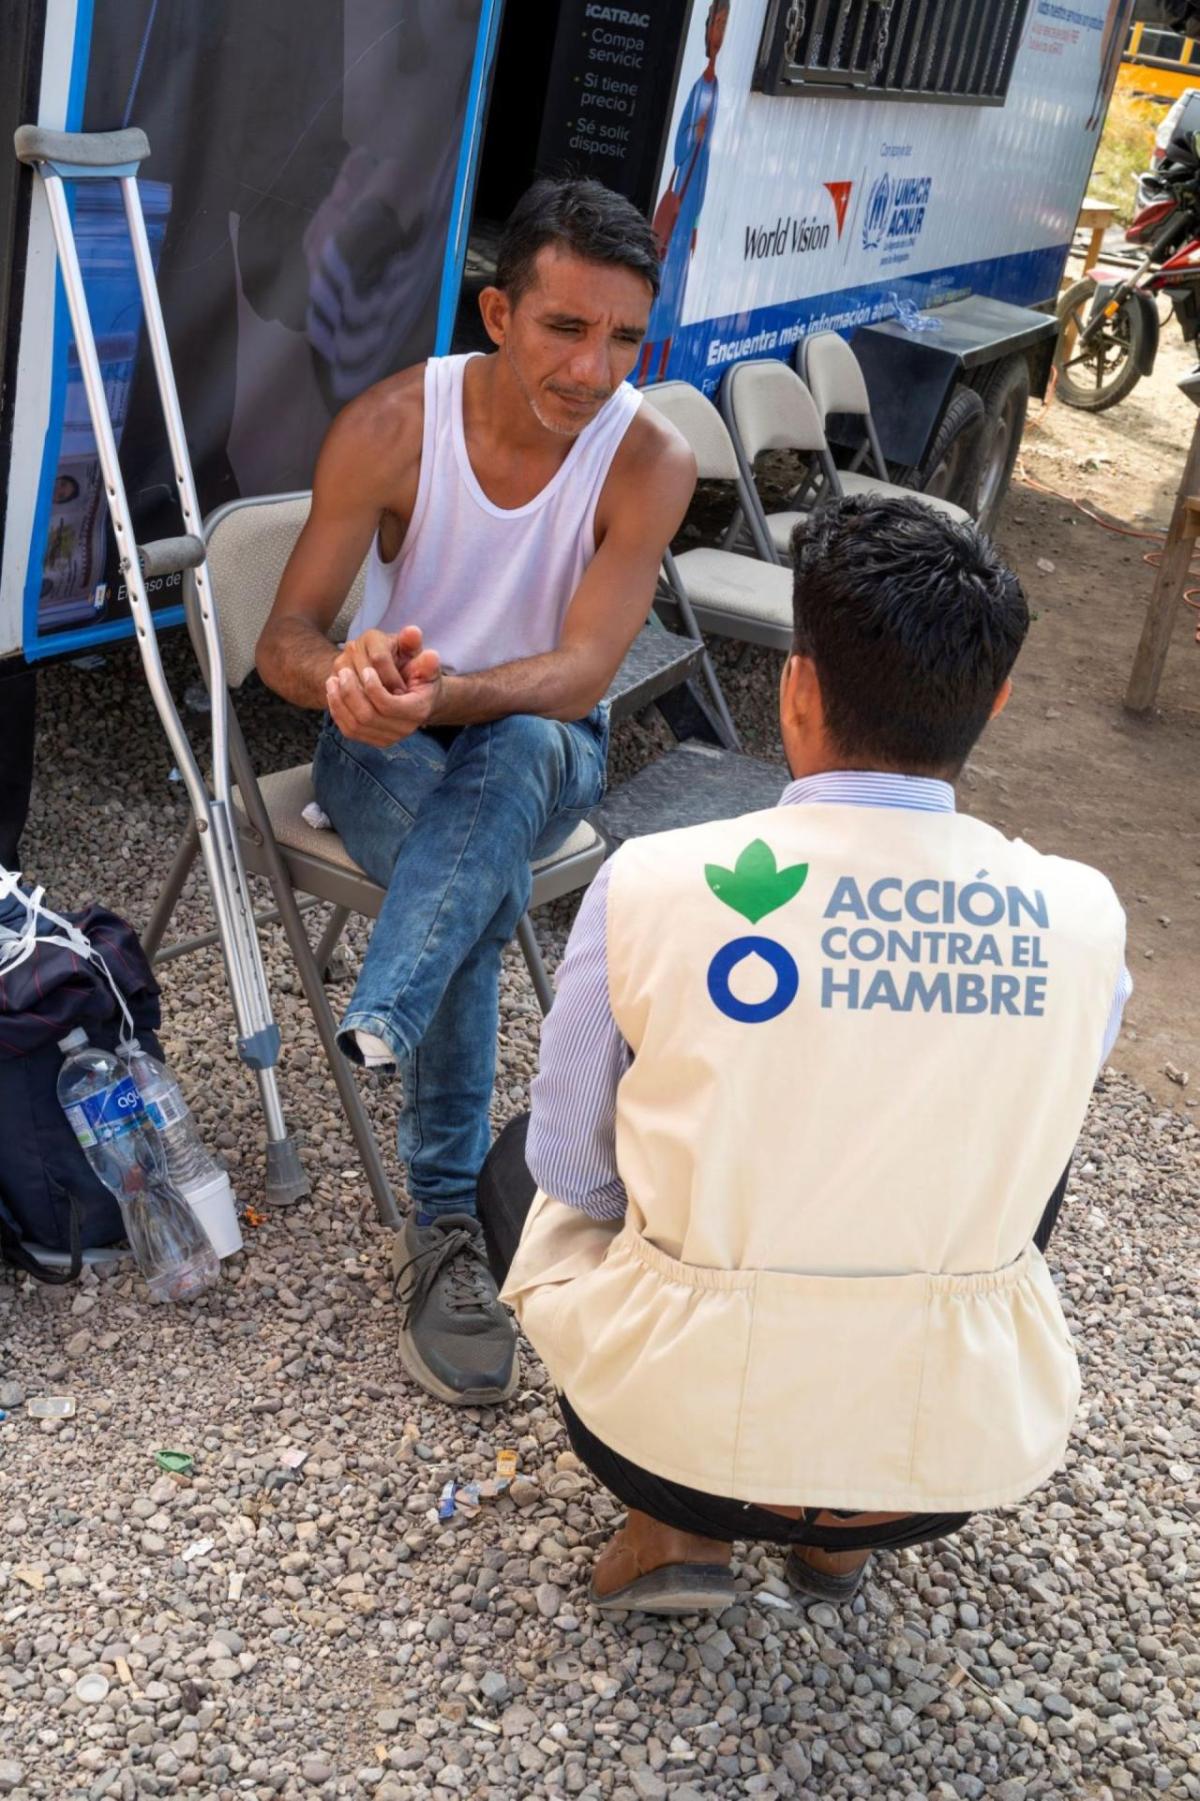 Last year, Action Against Hunger reached over 150,000 people in Honduras through our programs aimed at treating malnutrition, increasing food security and connecting families with clean water and hygiene services. / Photo by Gonzalo Höhr